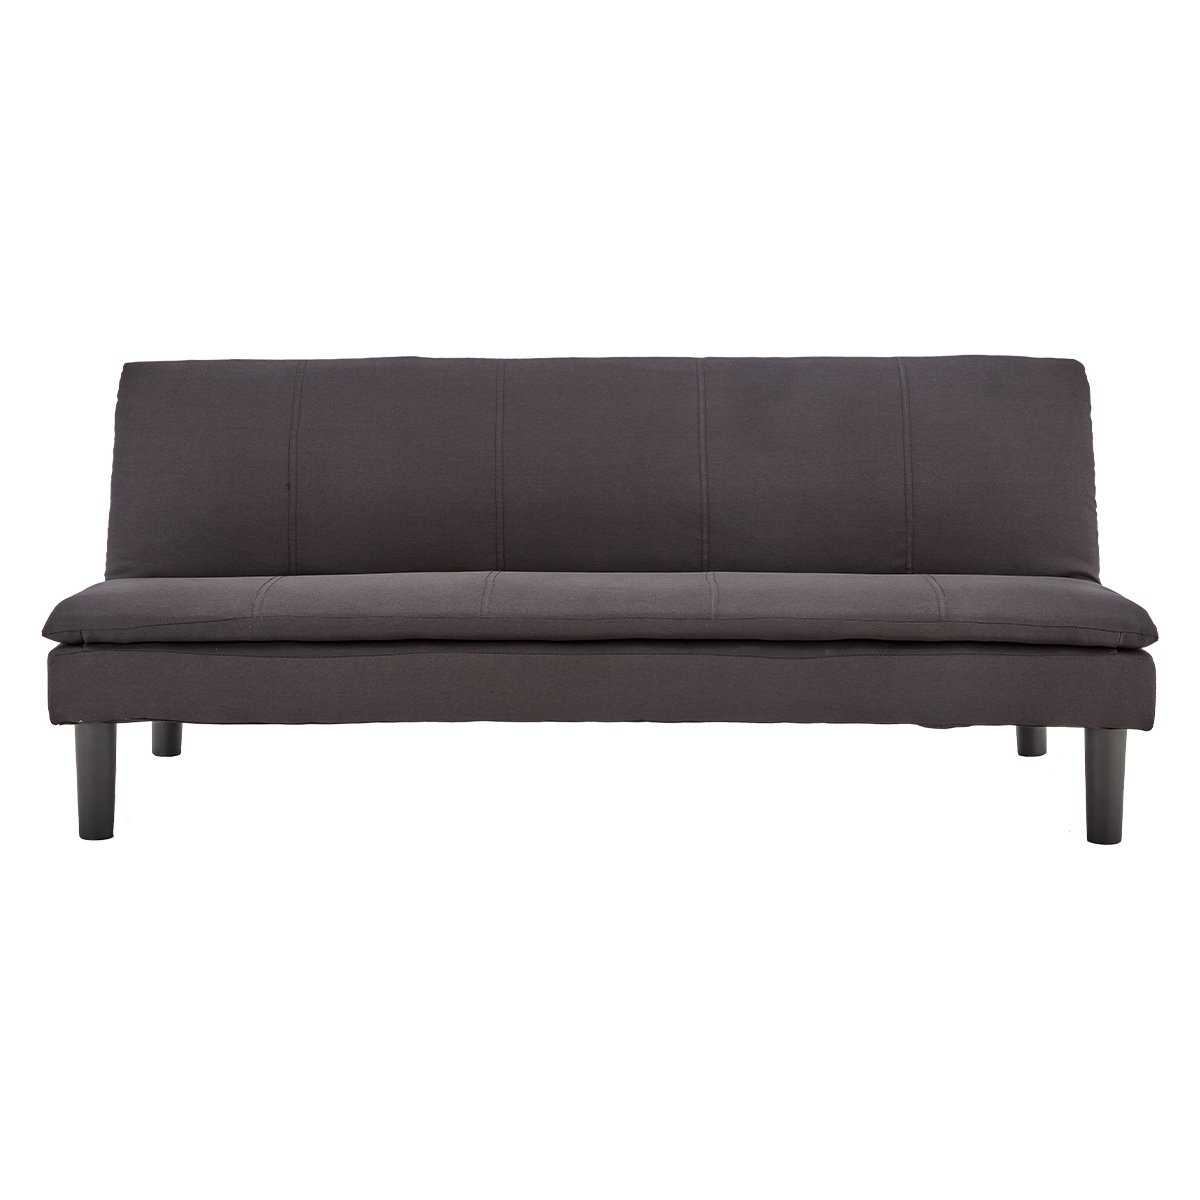 Sarantino 3 Seater Modular Faux Linen Fabric Sofa Bed Couch - Black 1